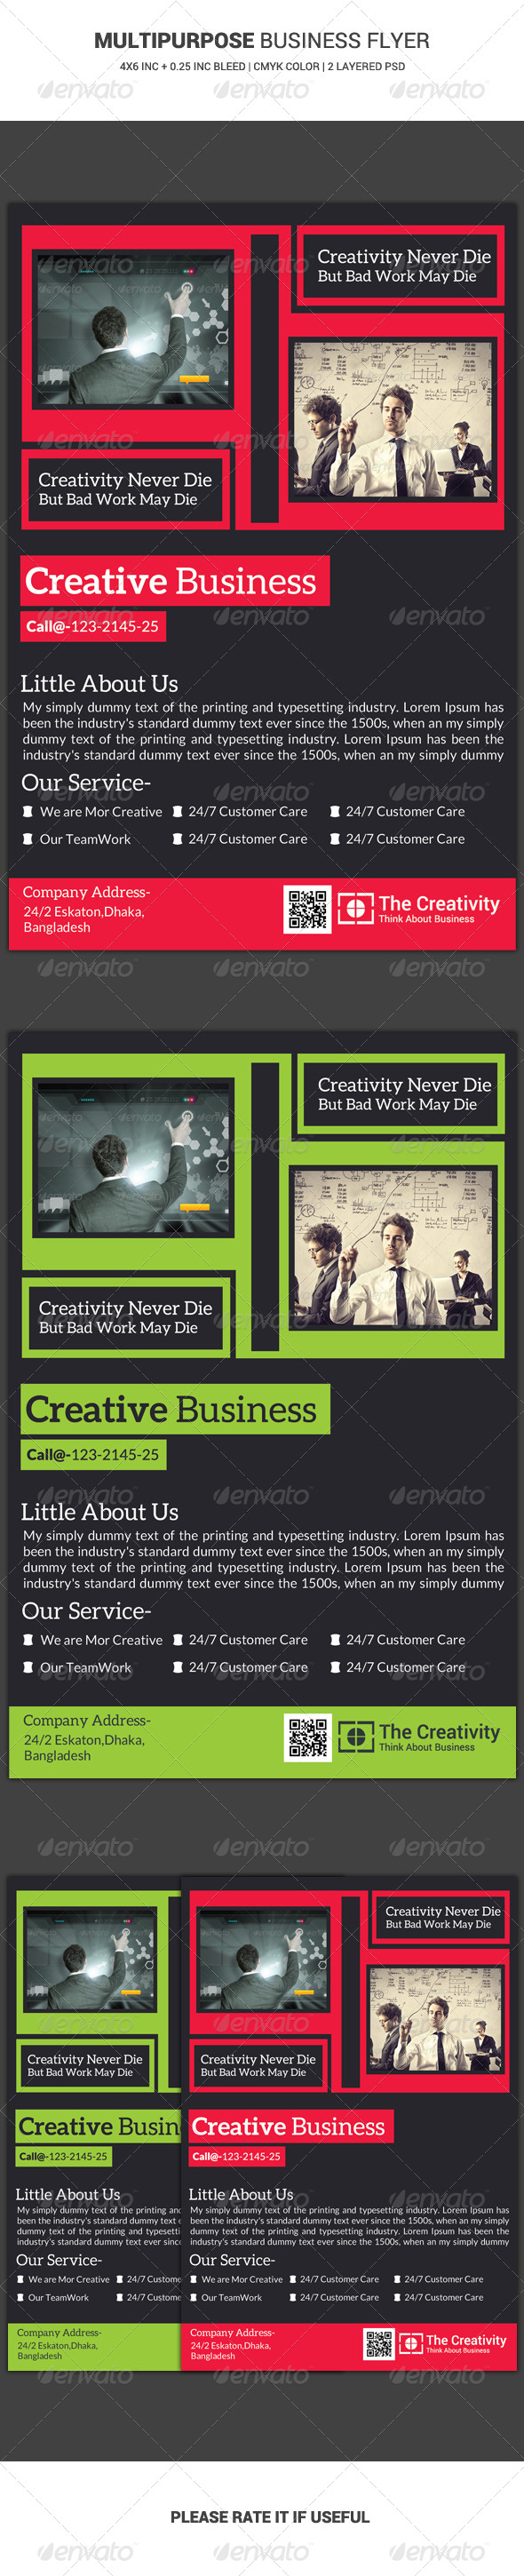 Business Flyer Template 14 (Corporate)